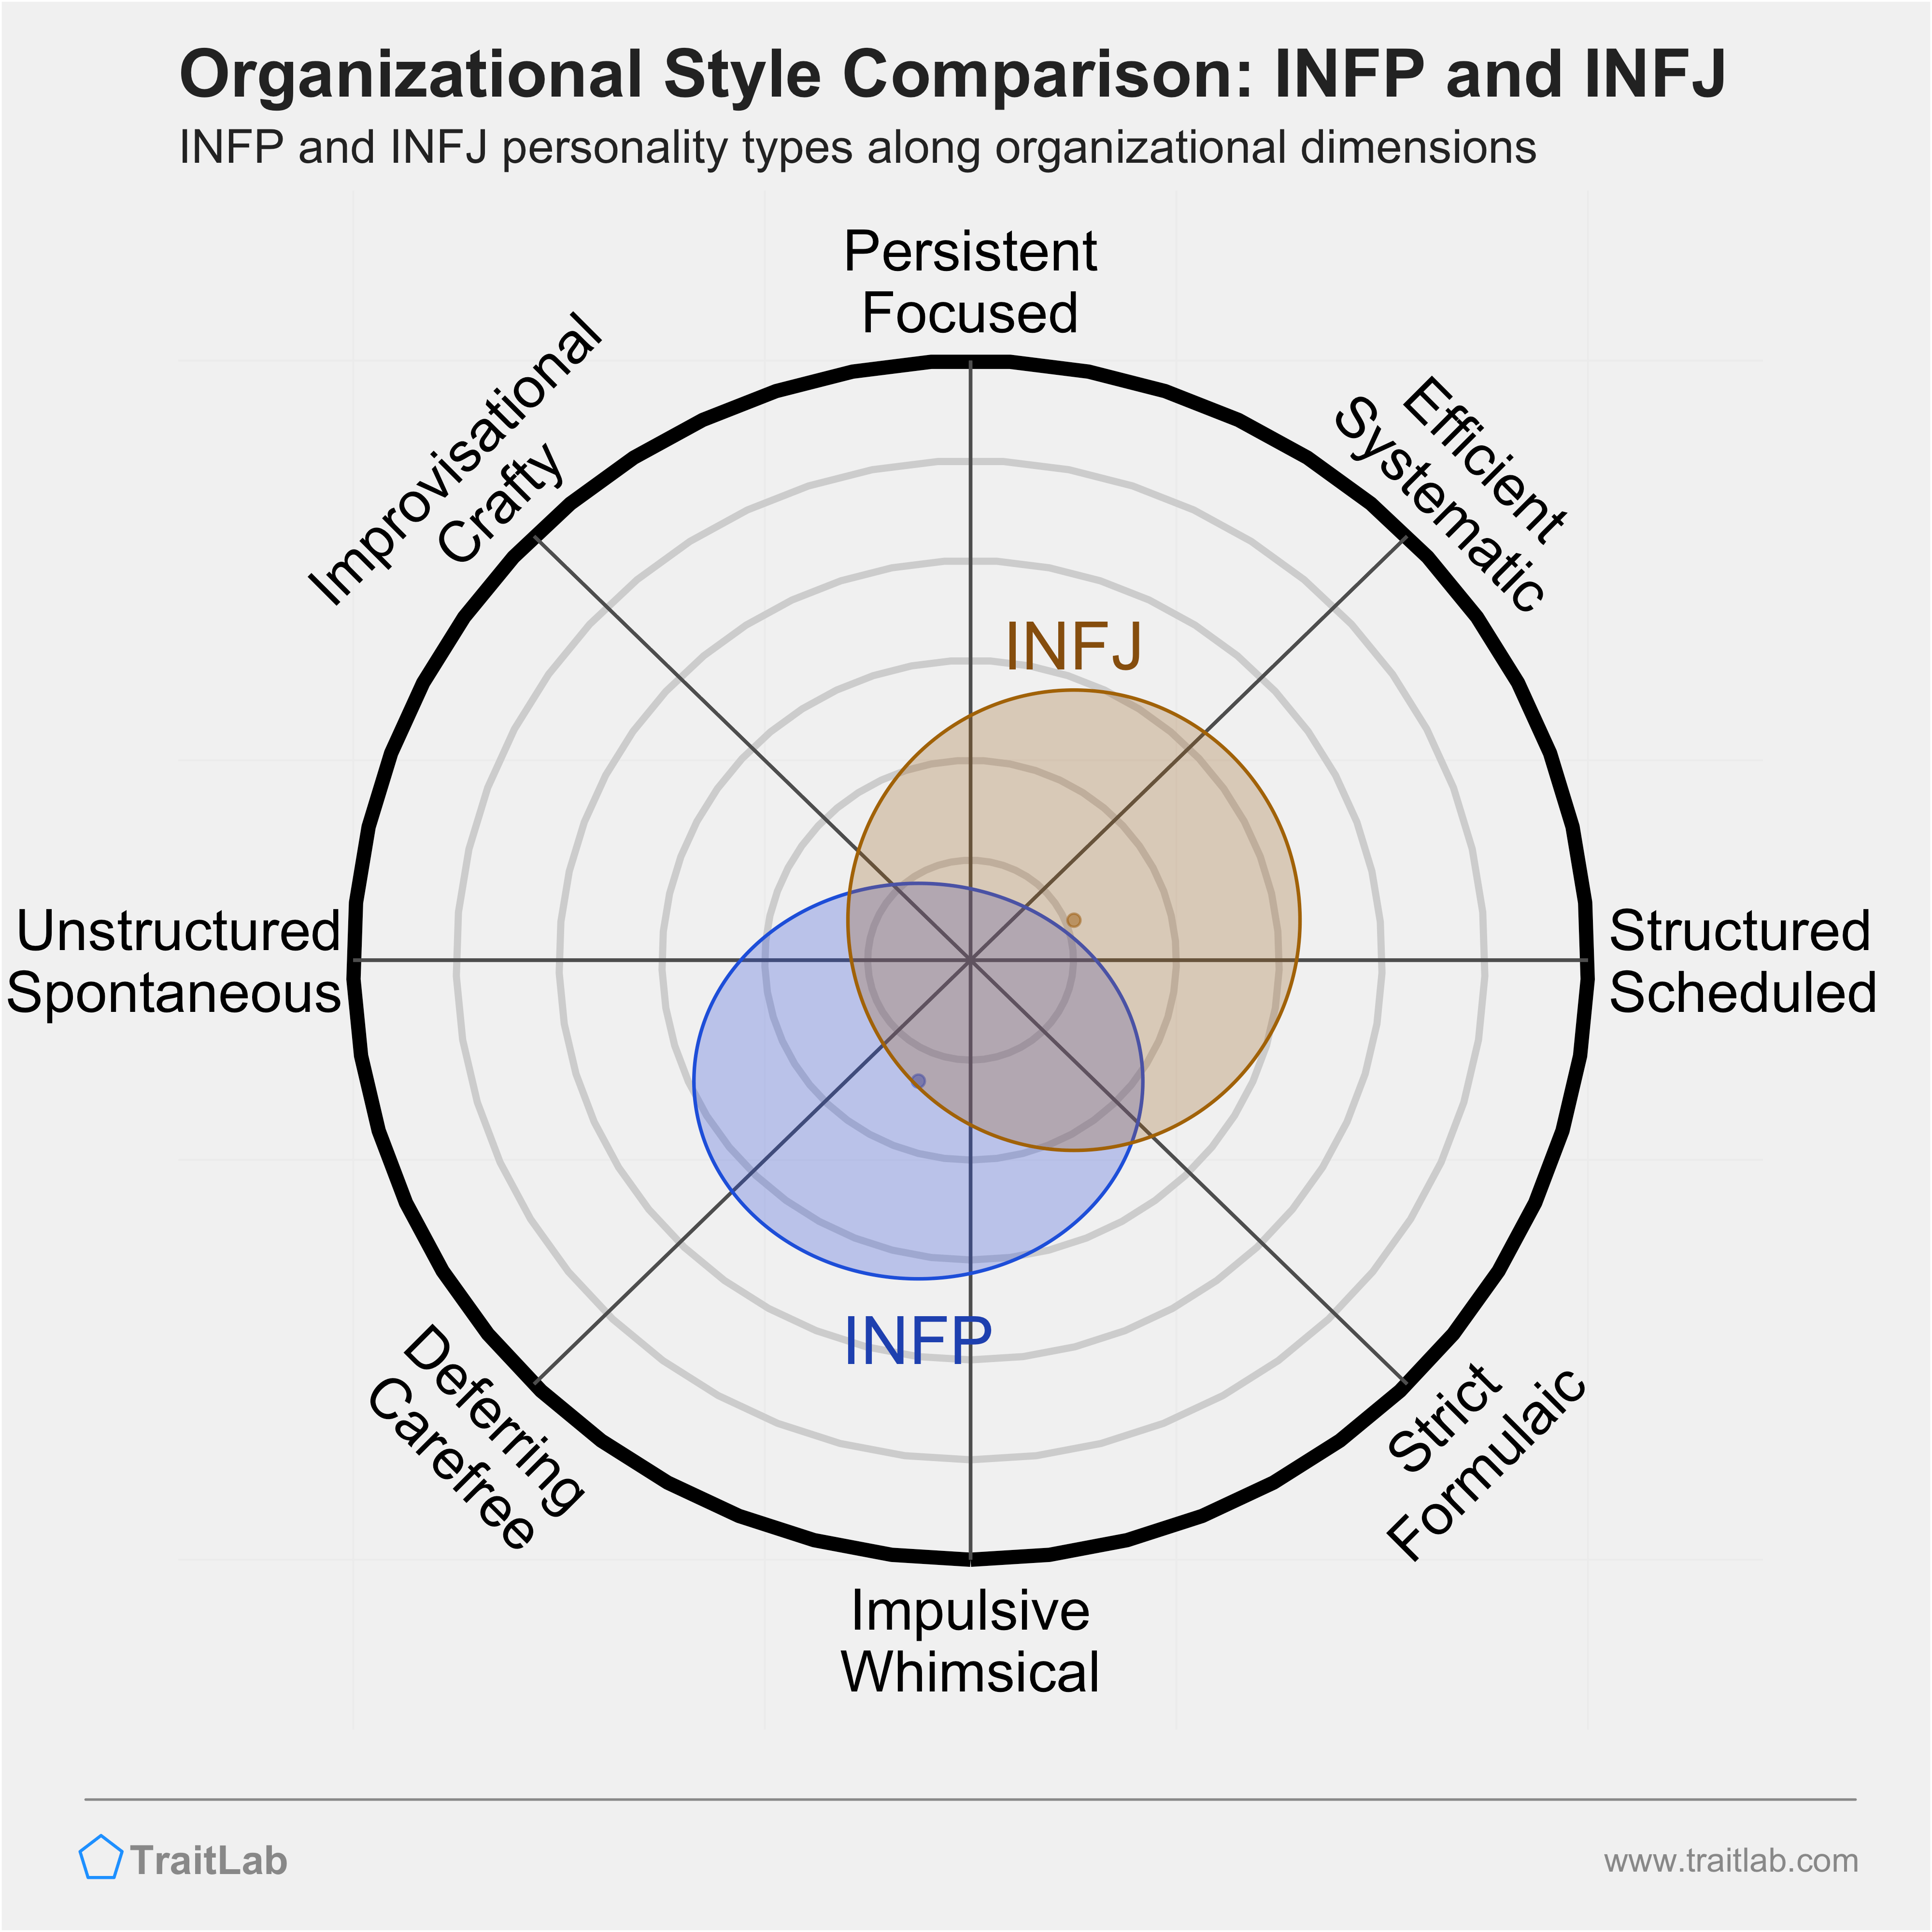 INFP and INFJ comparison across organizational dimensions